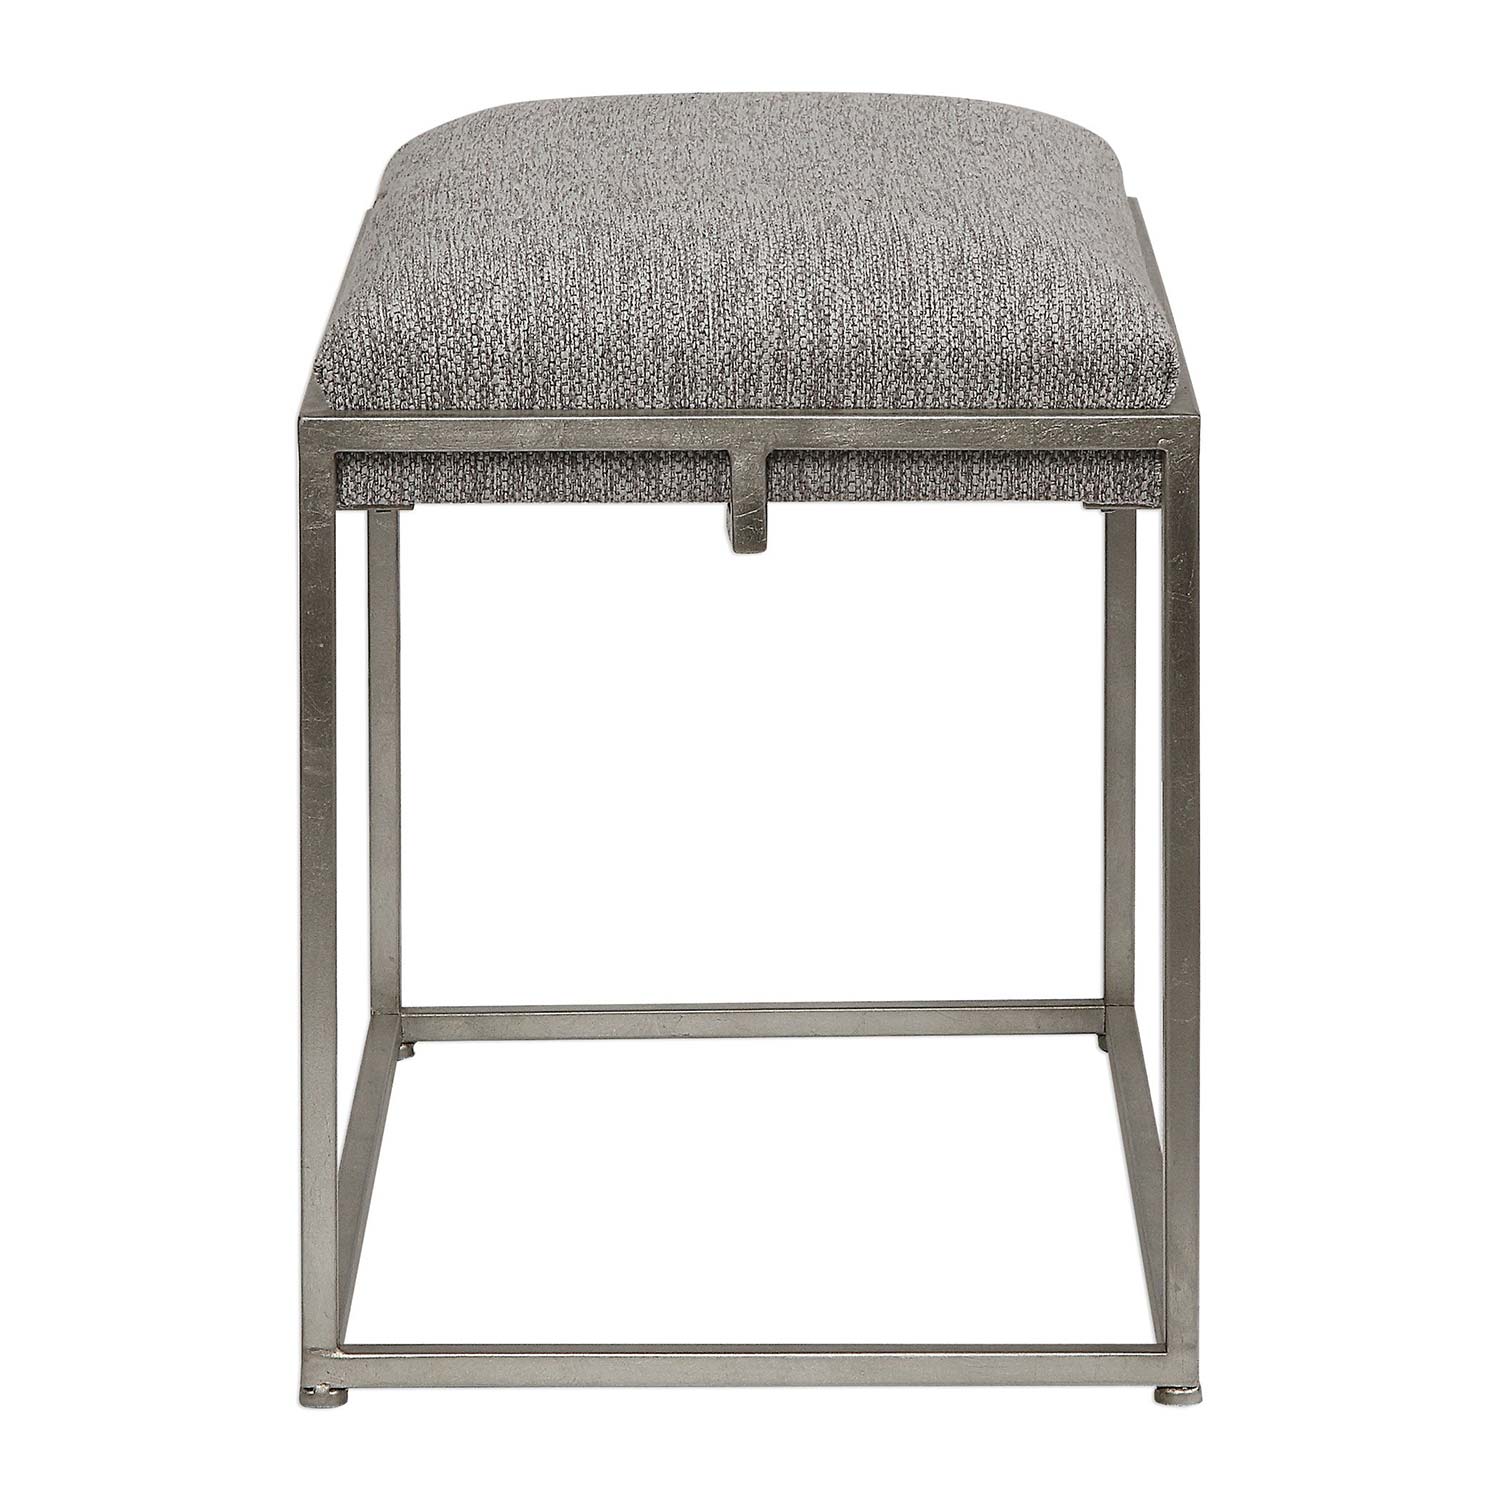 Uttermost Edie Small Bench - Silver